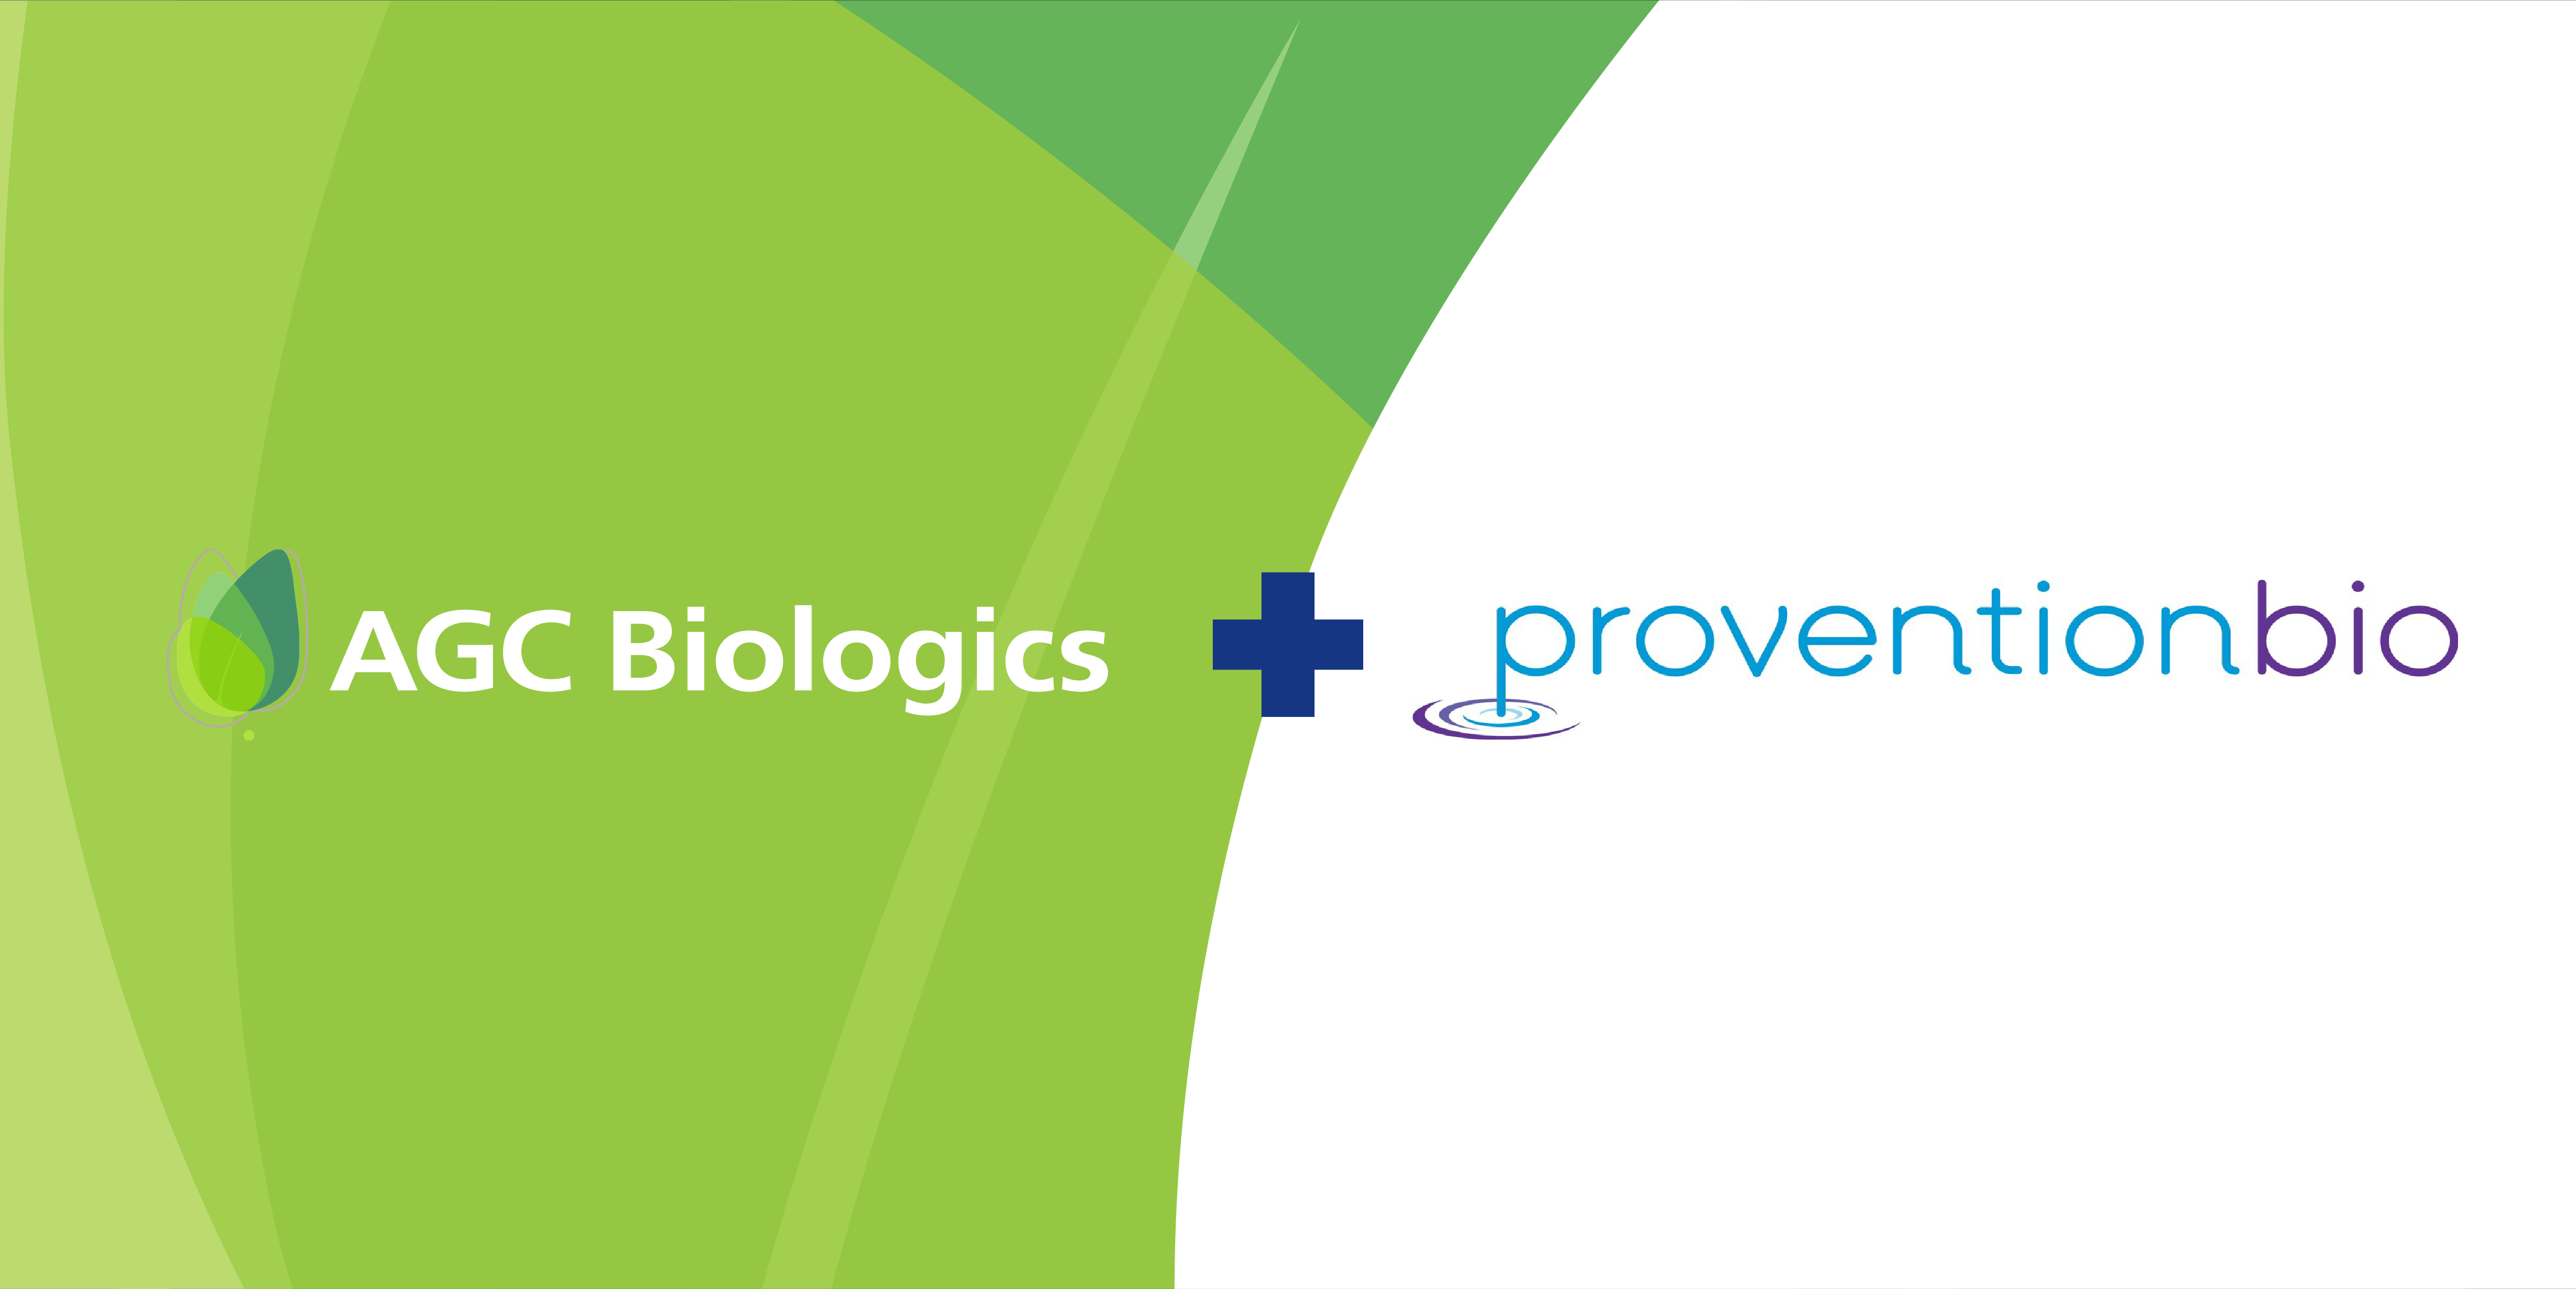 AGC Biologics to Commercial Manufacture Provention Bio Diabetes Therapy